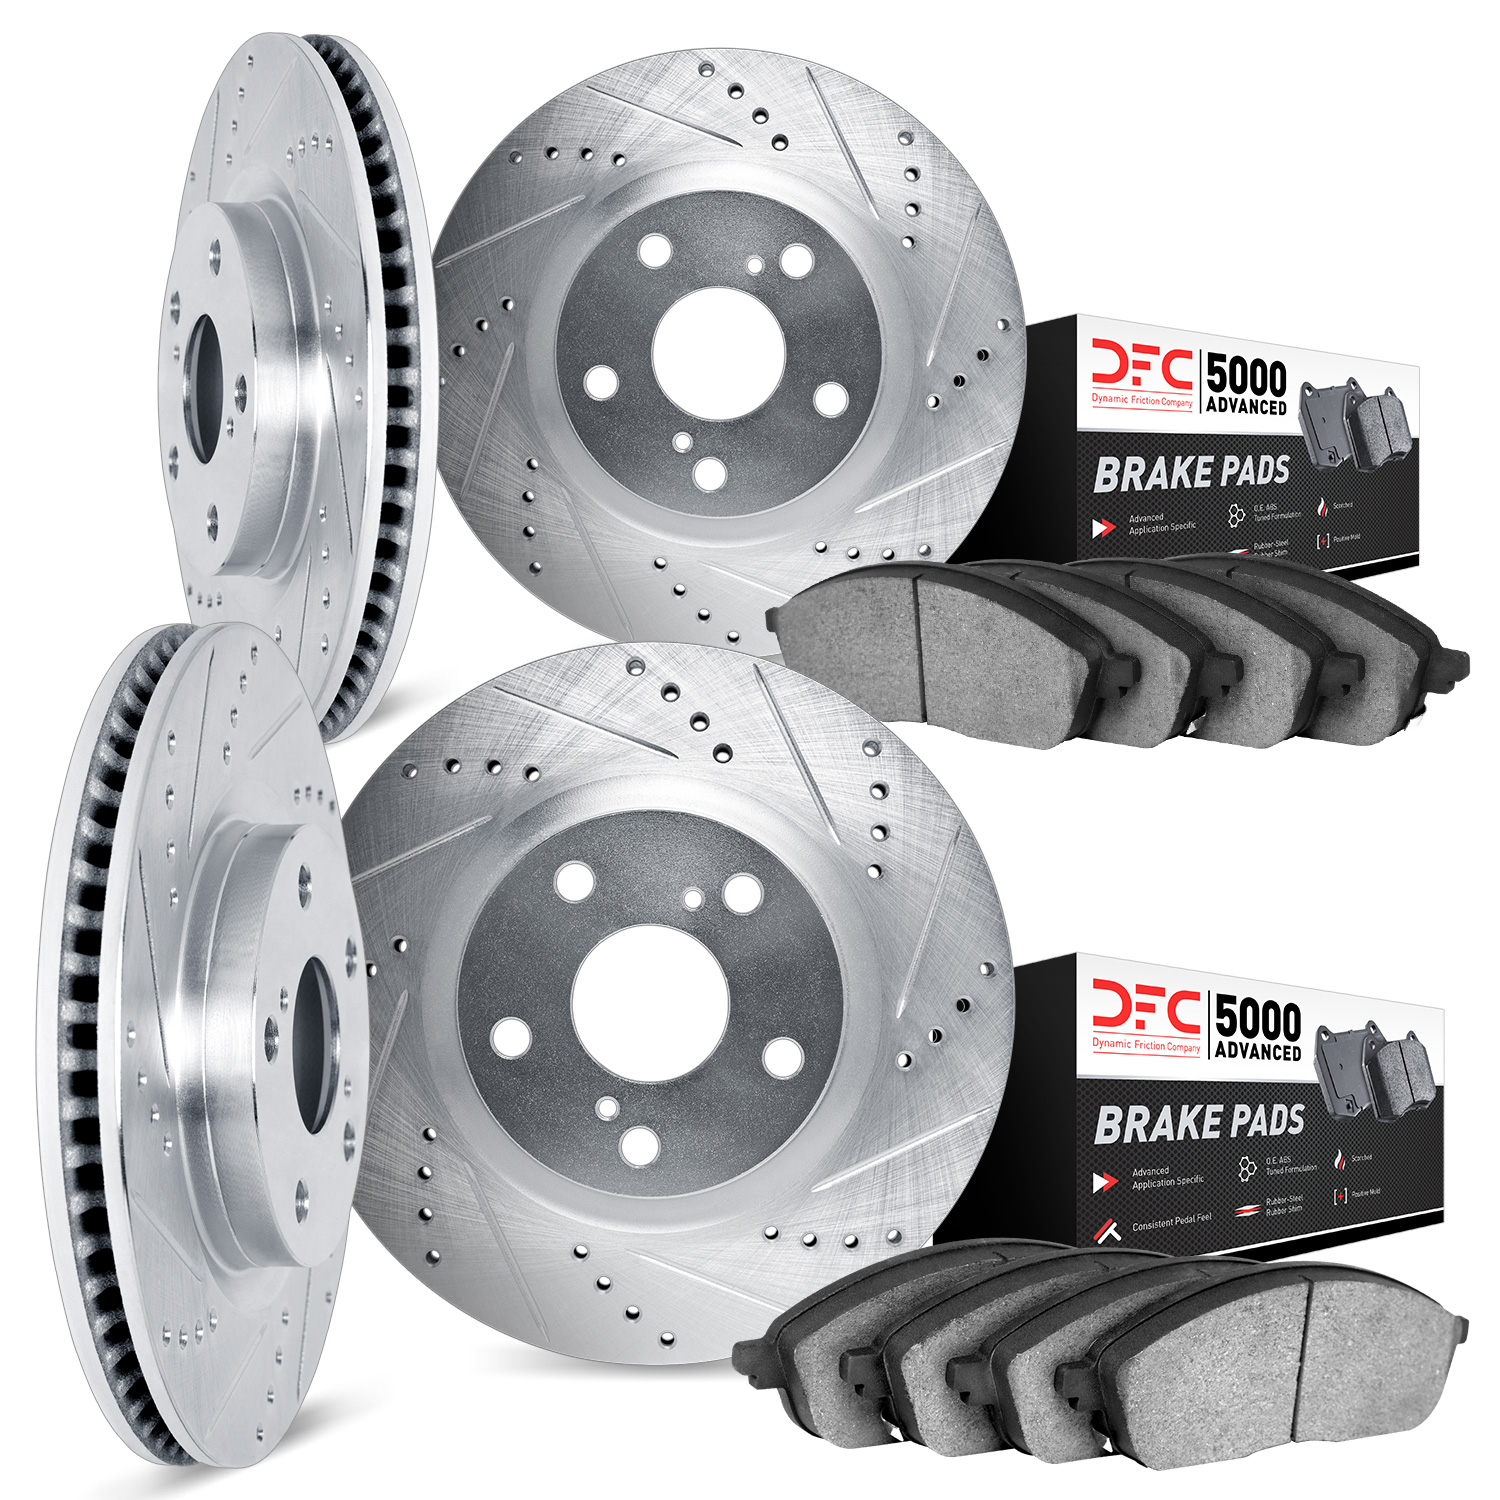 7504-31073 Drilled/Slotted Brake Rotors w/5000 Advanced Brake Pads Kit [Silver], 2008-2014 BMW, Position: Front and Rear